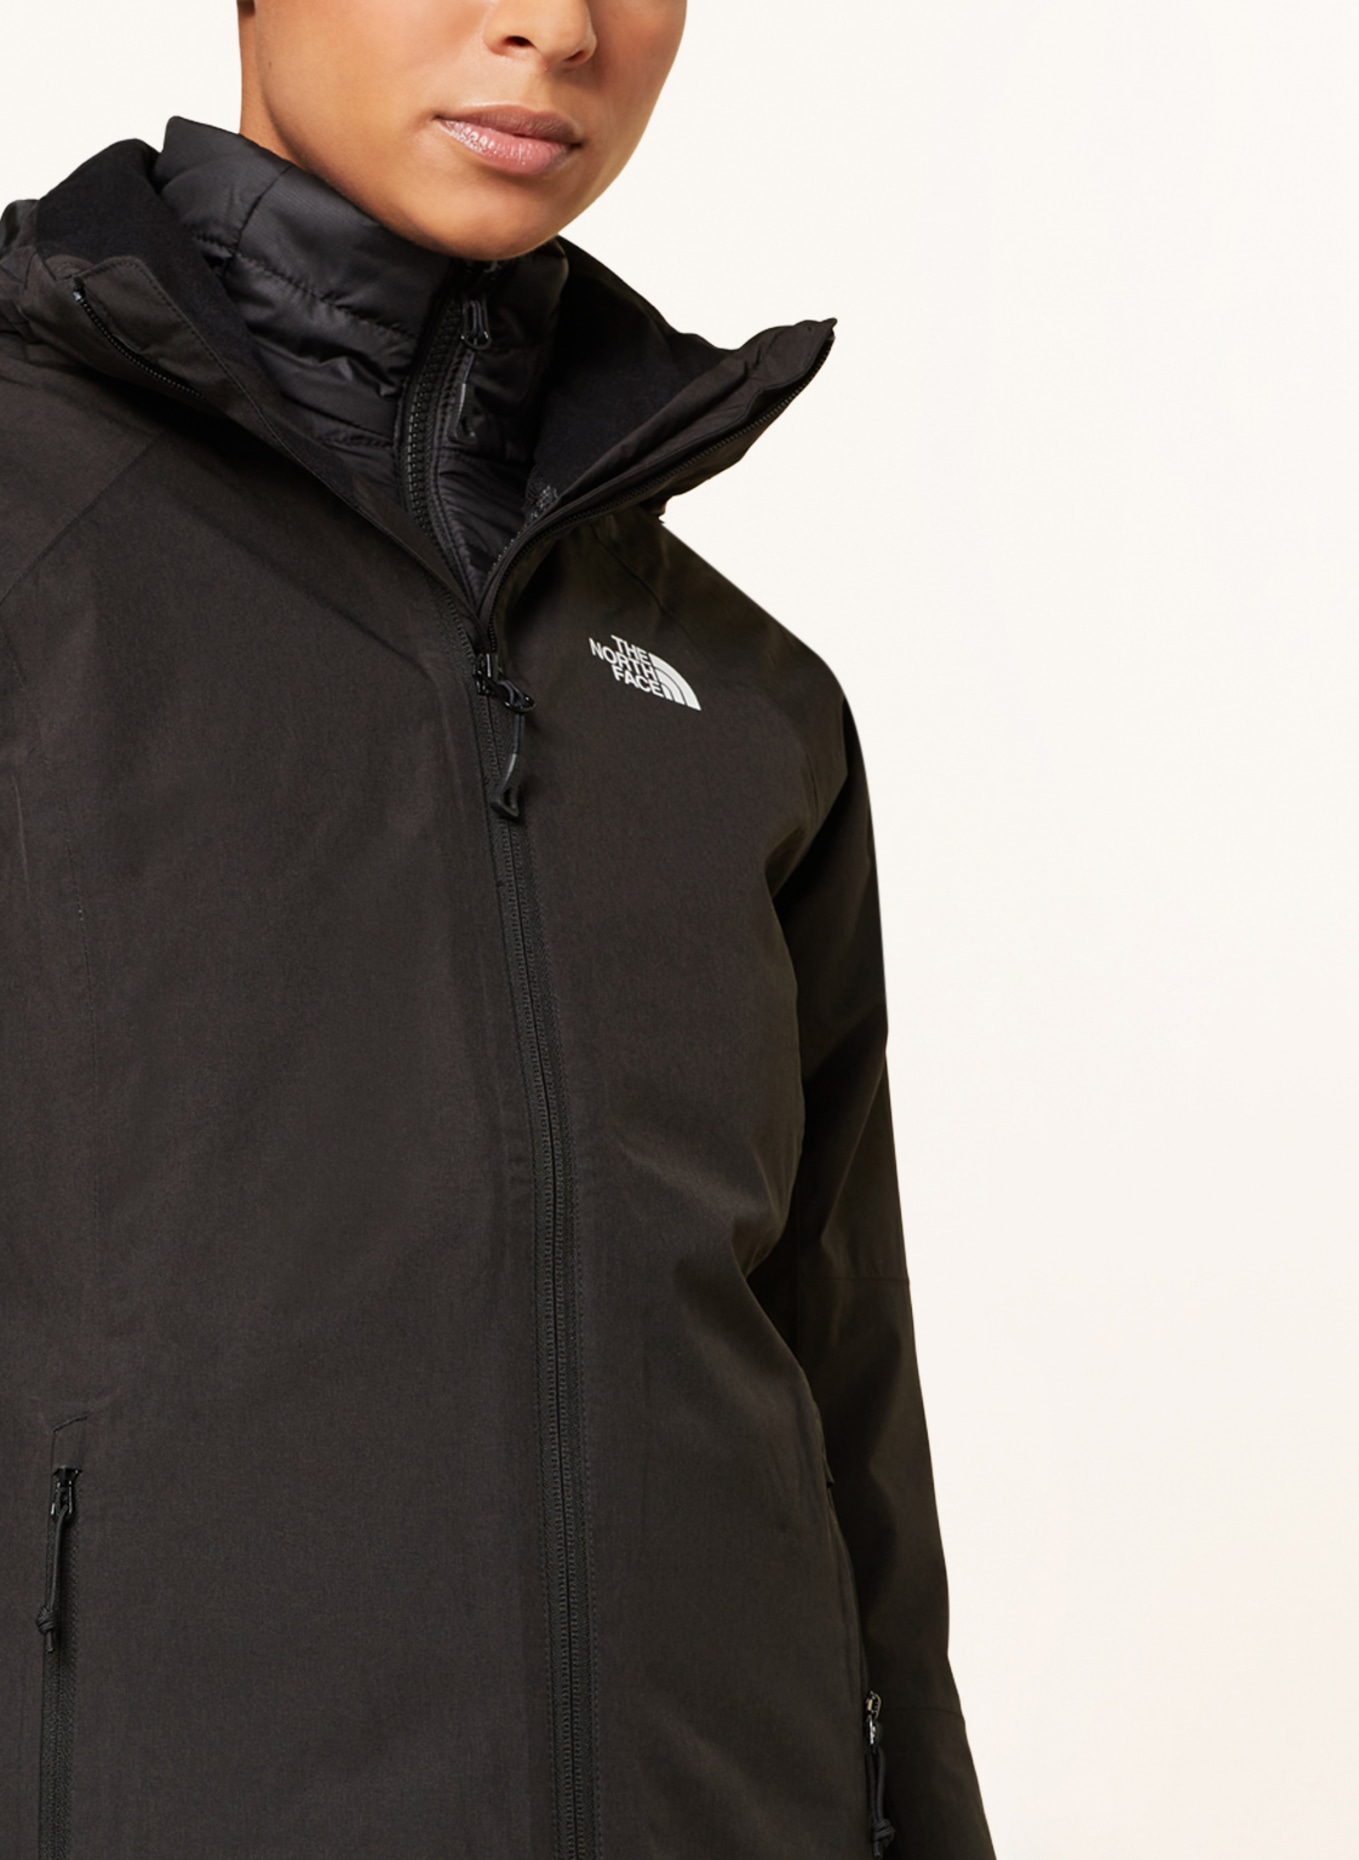 THE NORTH FACE 3-in-1-Jacke INLUX TRICLIMATE®, Farbe: SCHWARZ (Bild 5)